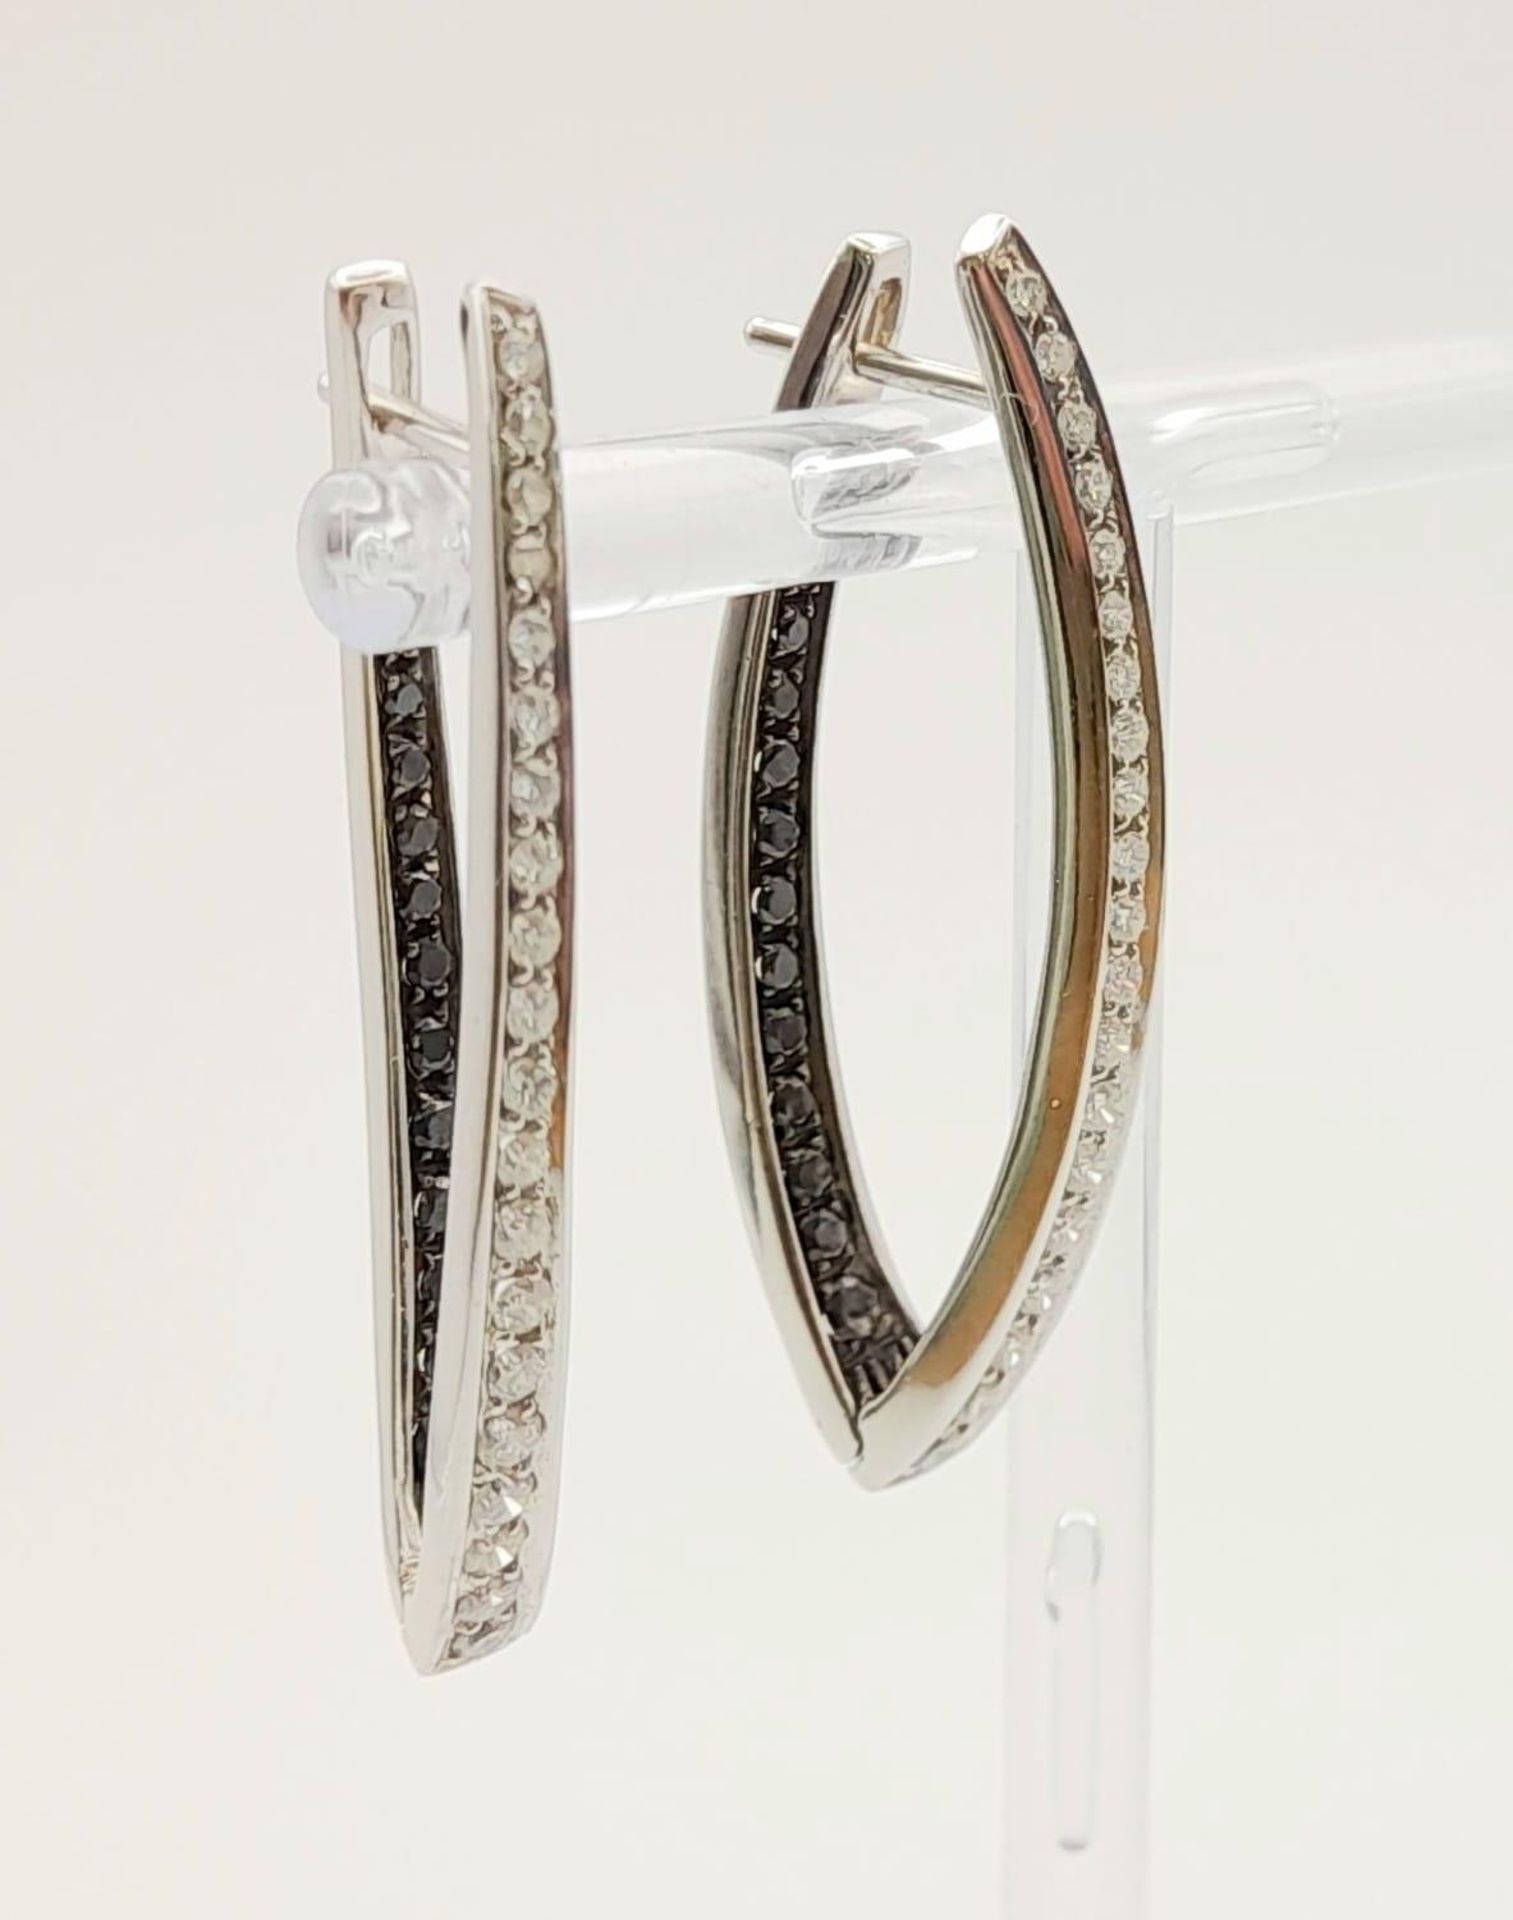 A Pair of Designer Palmiero 18K White Gold, Black and White Diamond Elongated Hoop Earrings. 0. - Image 3 of 9